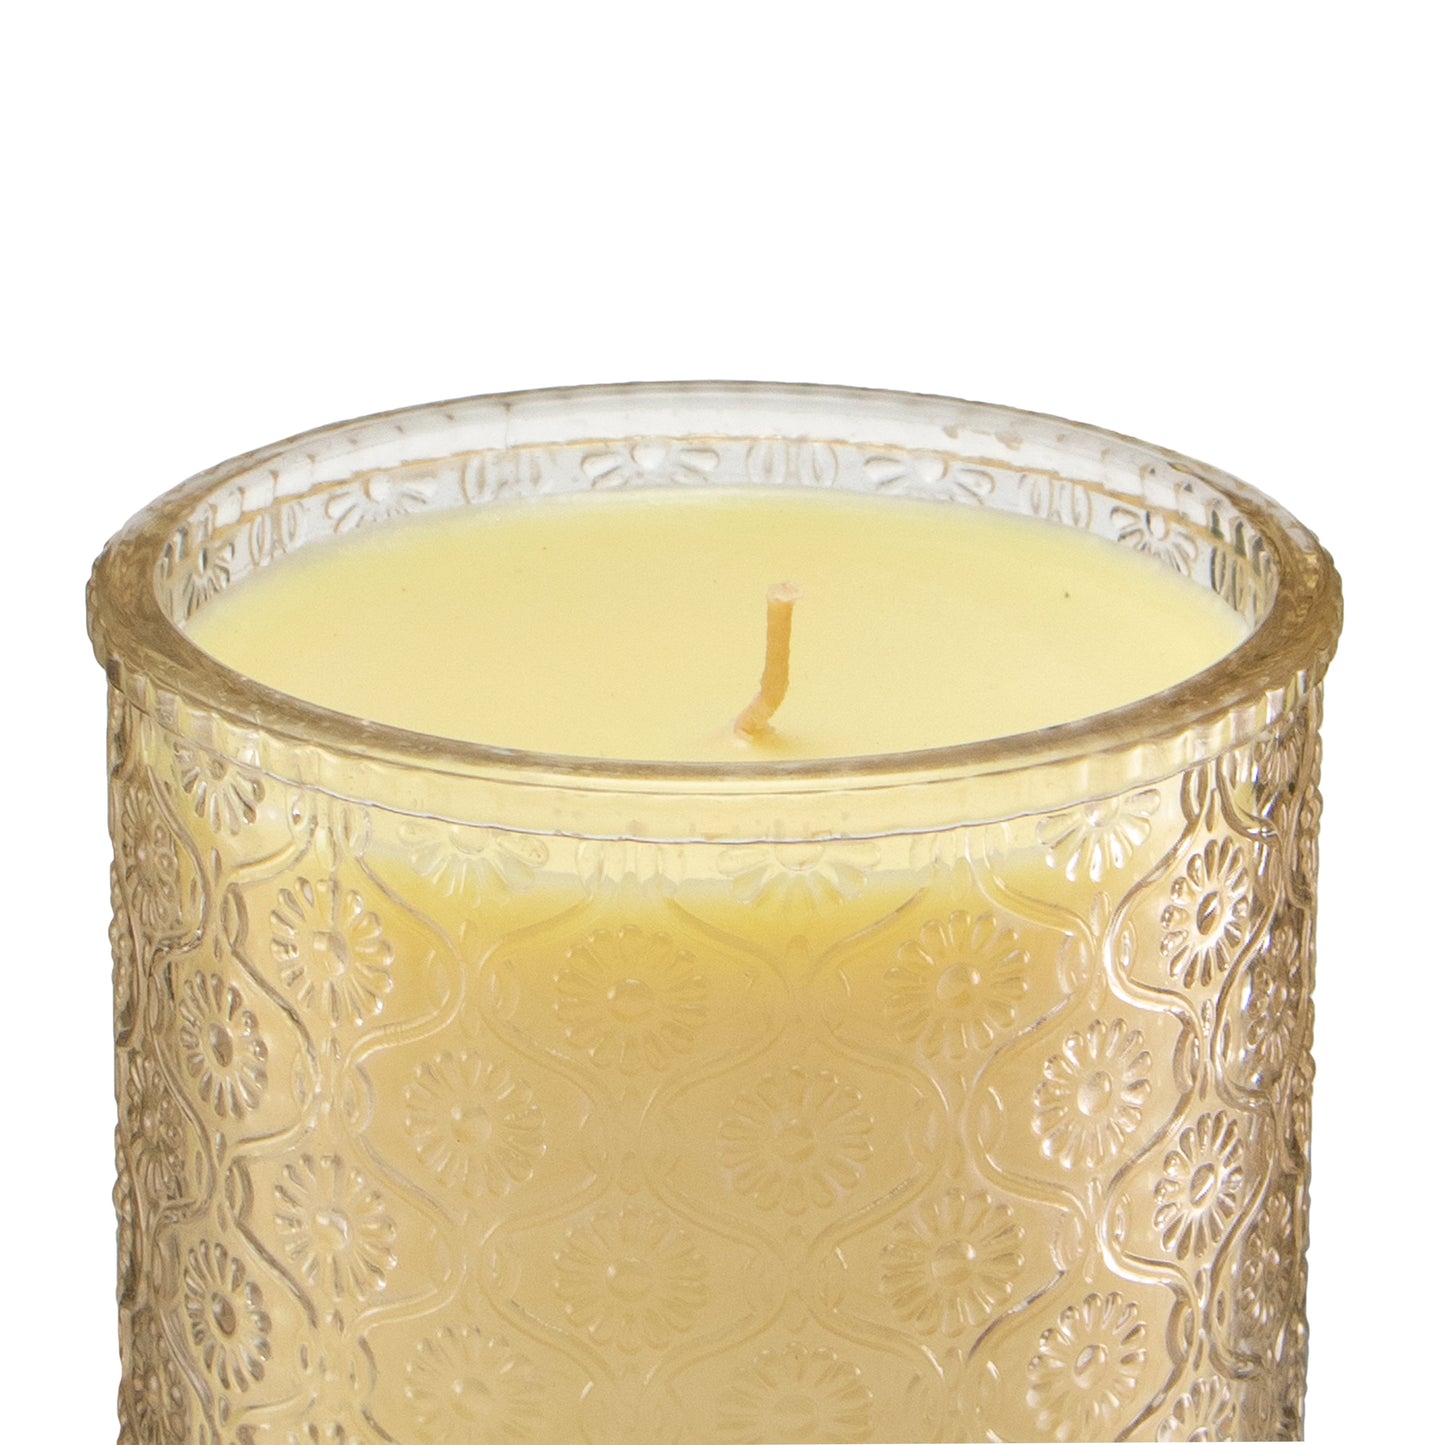 Pier 1 Cuban Vanilla Luxe 19oz Filled Candle